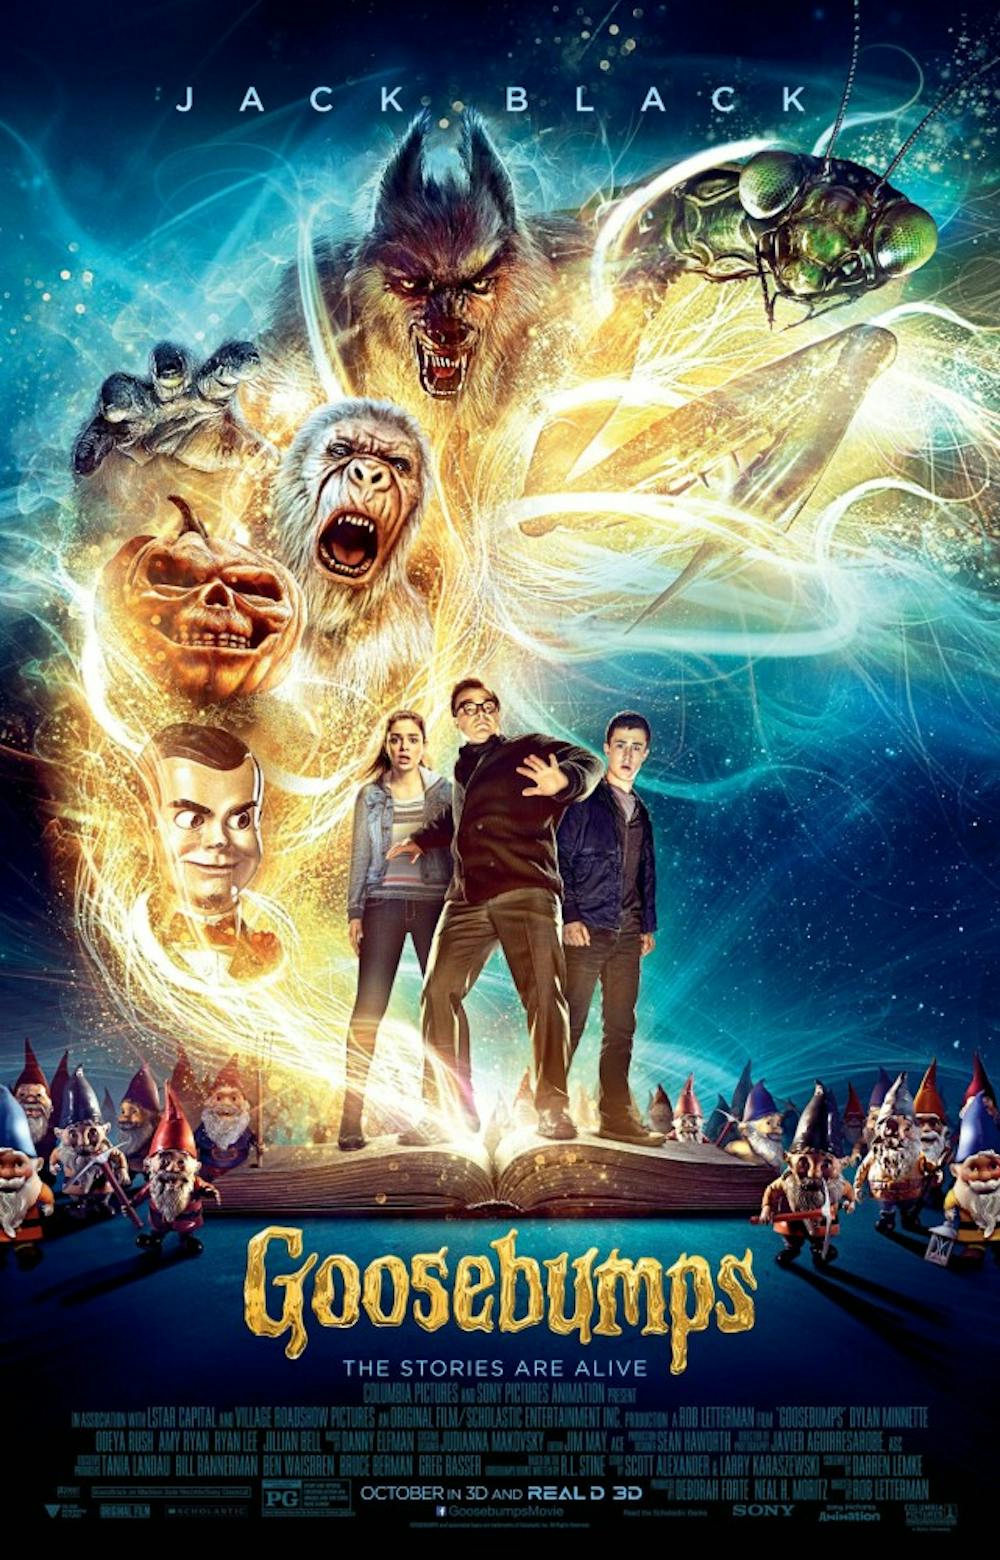 <p>“Goosebumps” is one of the many horror and thriller movies are coming out this month, released in the spirit of Halloween. In this film, R.L. Stine’s famous scary stories will finally make their way to the big screen. It premieres Oct. 16.</p>